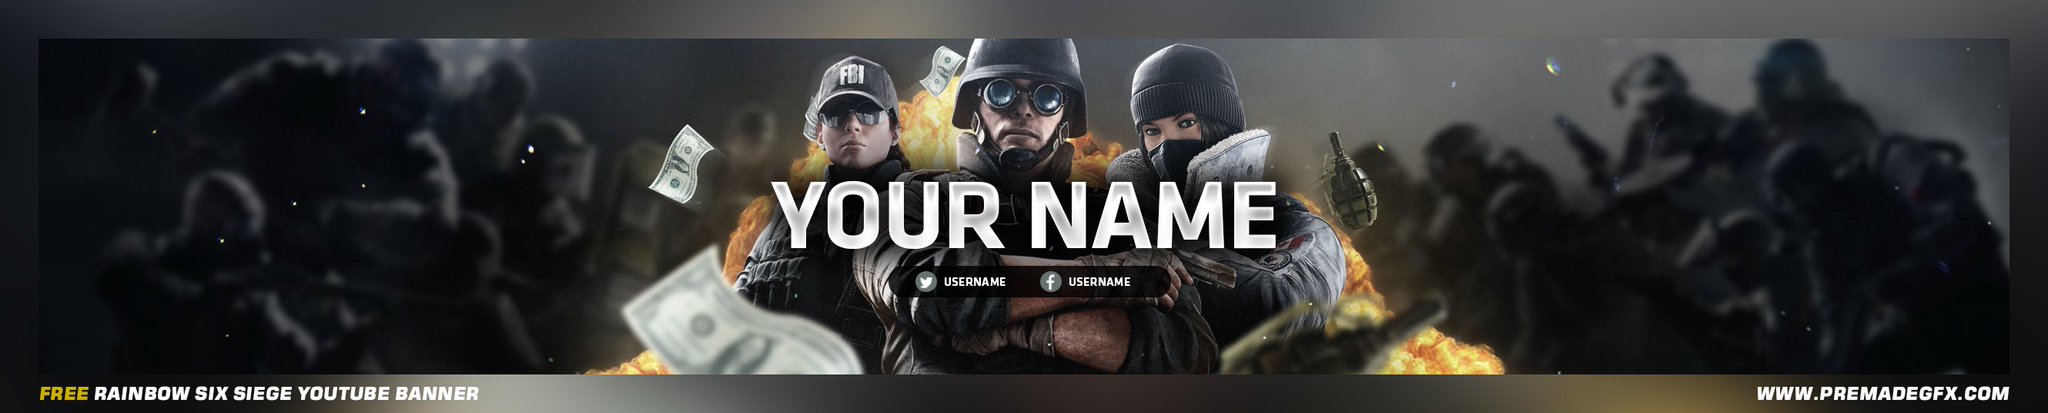 Uzivatel Premadegfx Na Twitteru Rainbow Six Siege Youtube Banner Coming Soon To Our Store For Free Keep Your Eyes Peeled For The Link Free Gfx Rs6 Youtube Banner Rainbow6game T Co Tpwmchjzjp